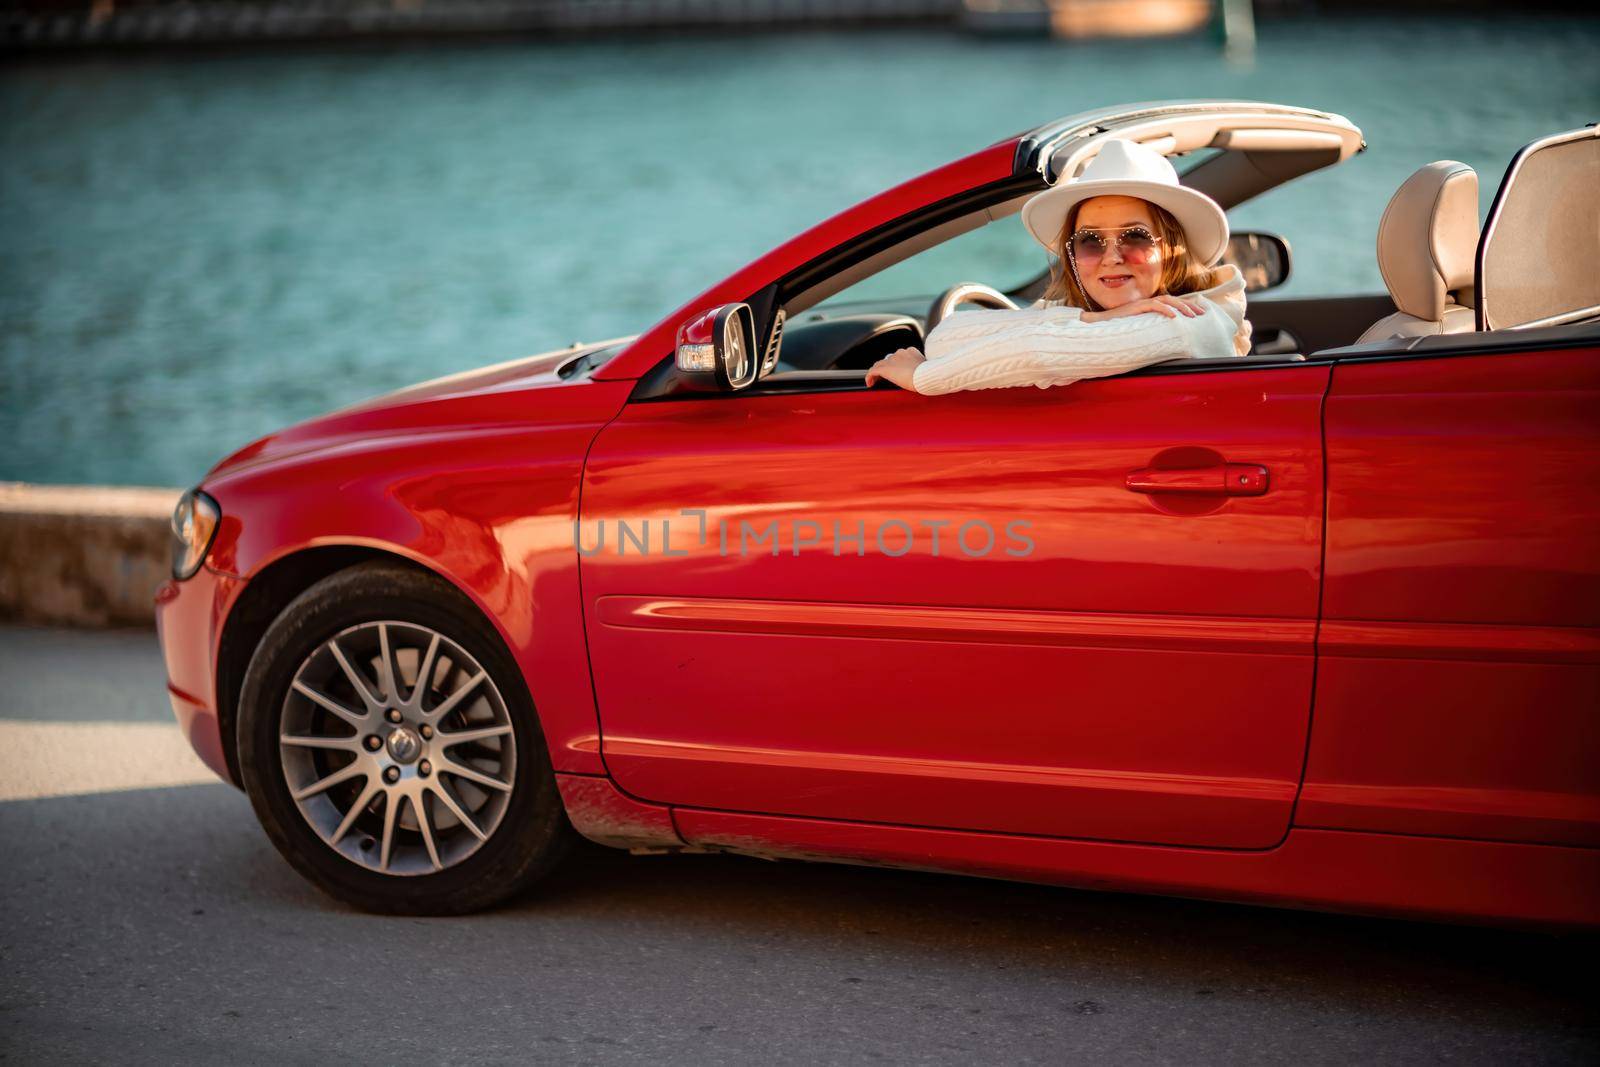 Outdoor summer portrait of stylish blonde woman driving red car convertible. Fashionable attractive woman with blond hair in a white hat in a red car. Sunny bright colors taken outdoors against the sea. by Matiunina